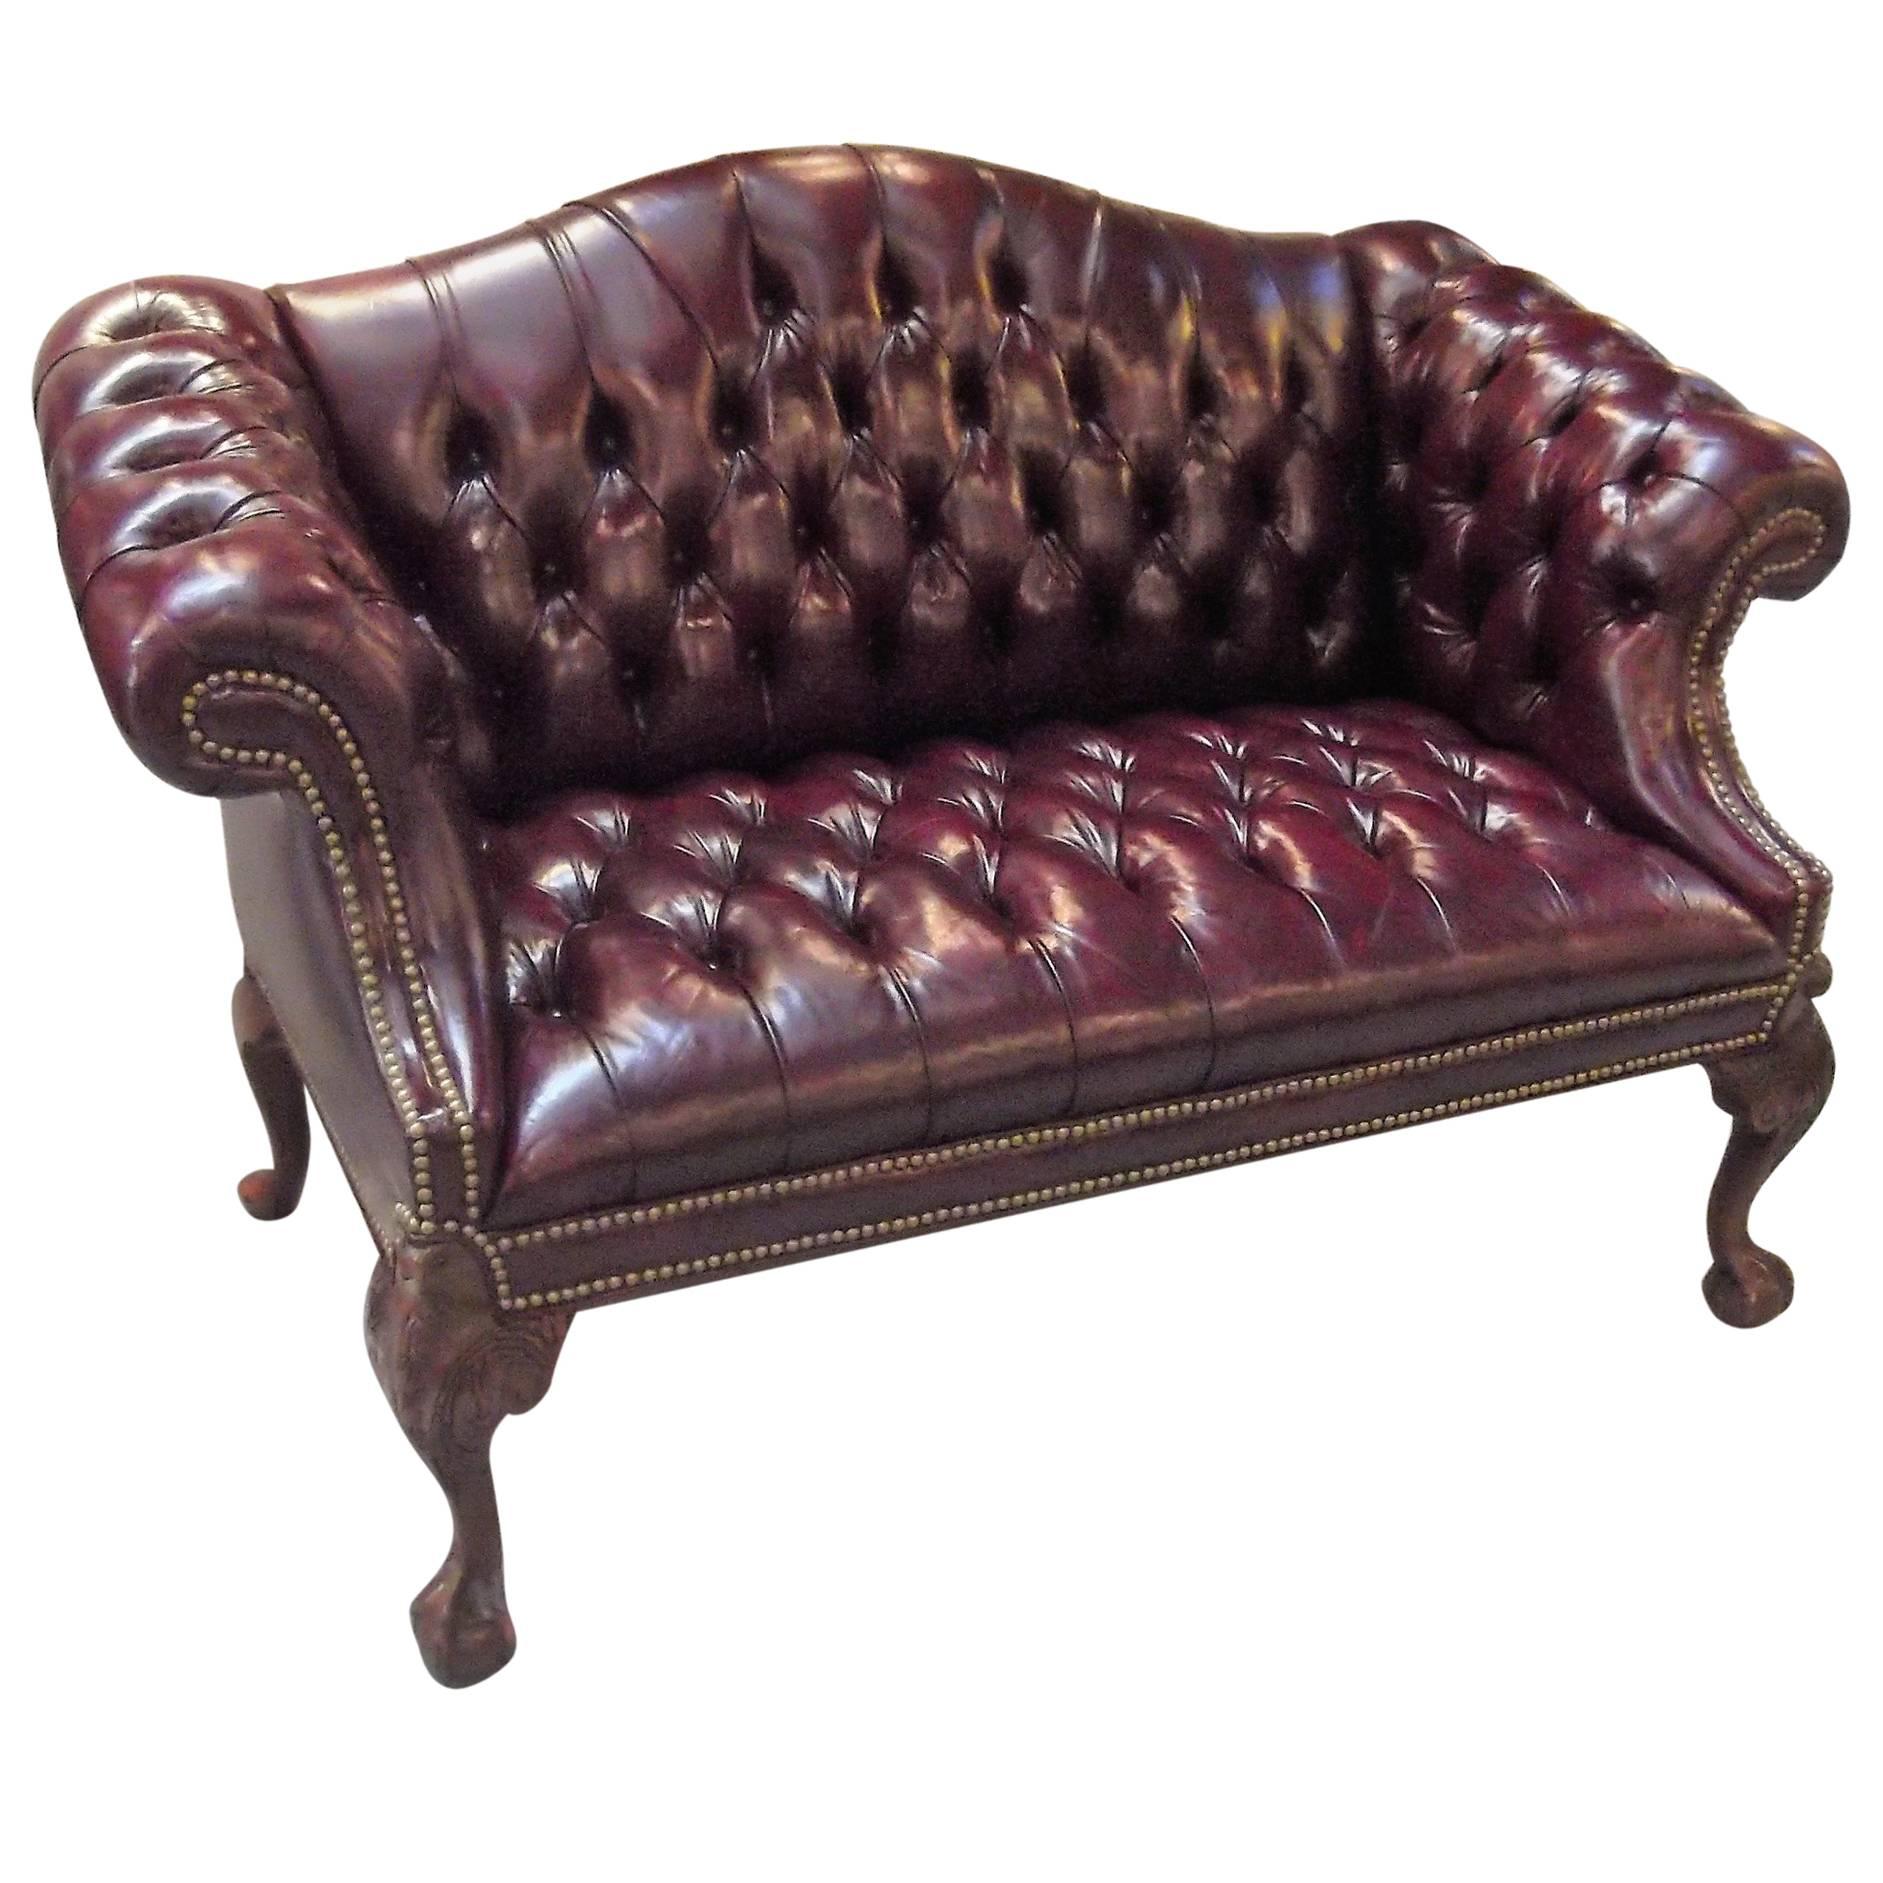 Cordovan Leather Camel Back Settee